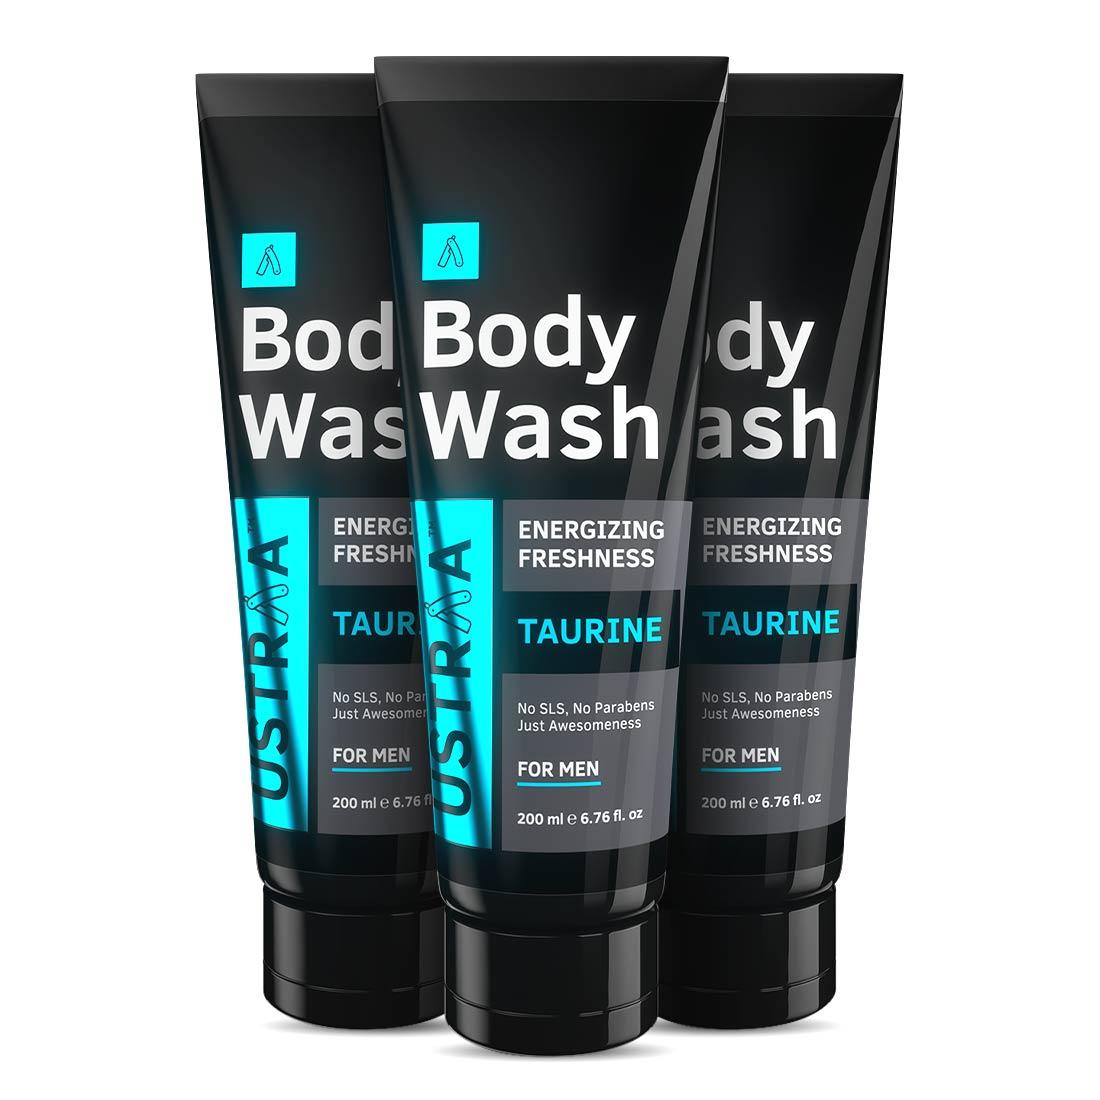 Body Wash for Men - Taurine - 200 ml - Set of 3